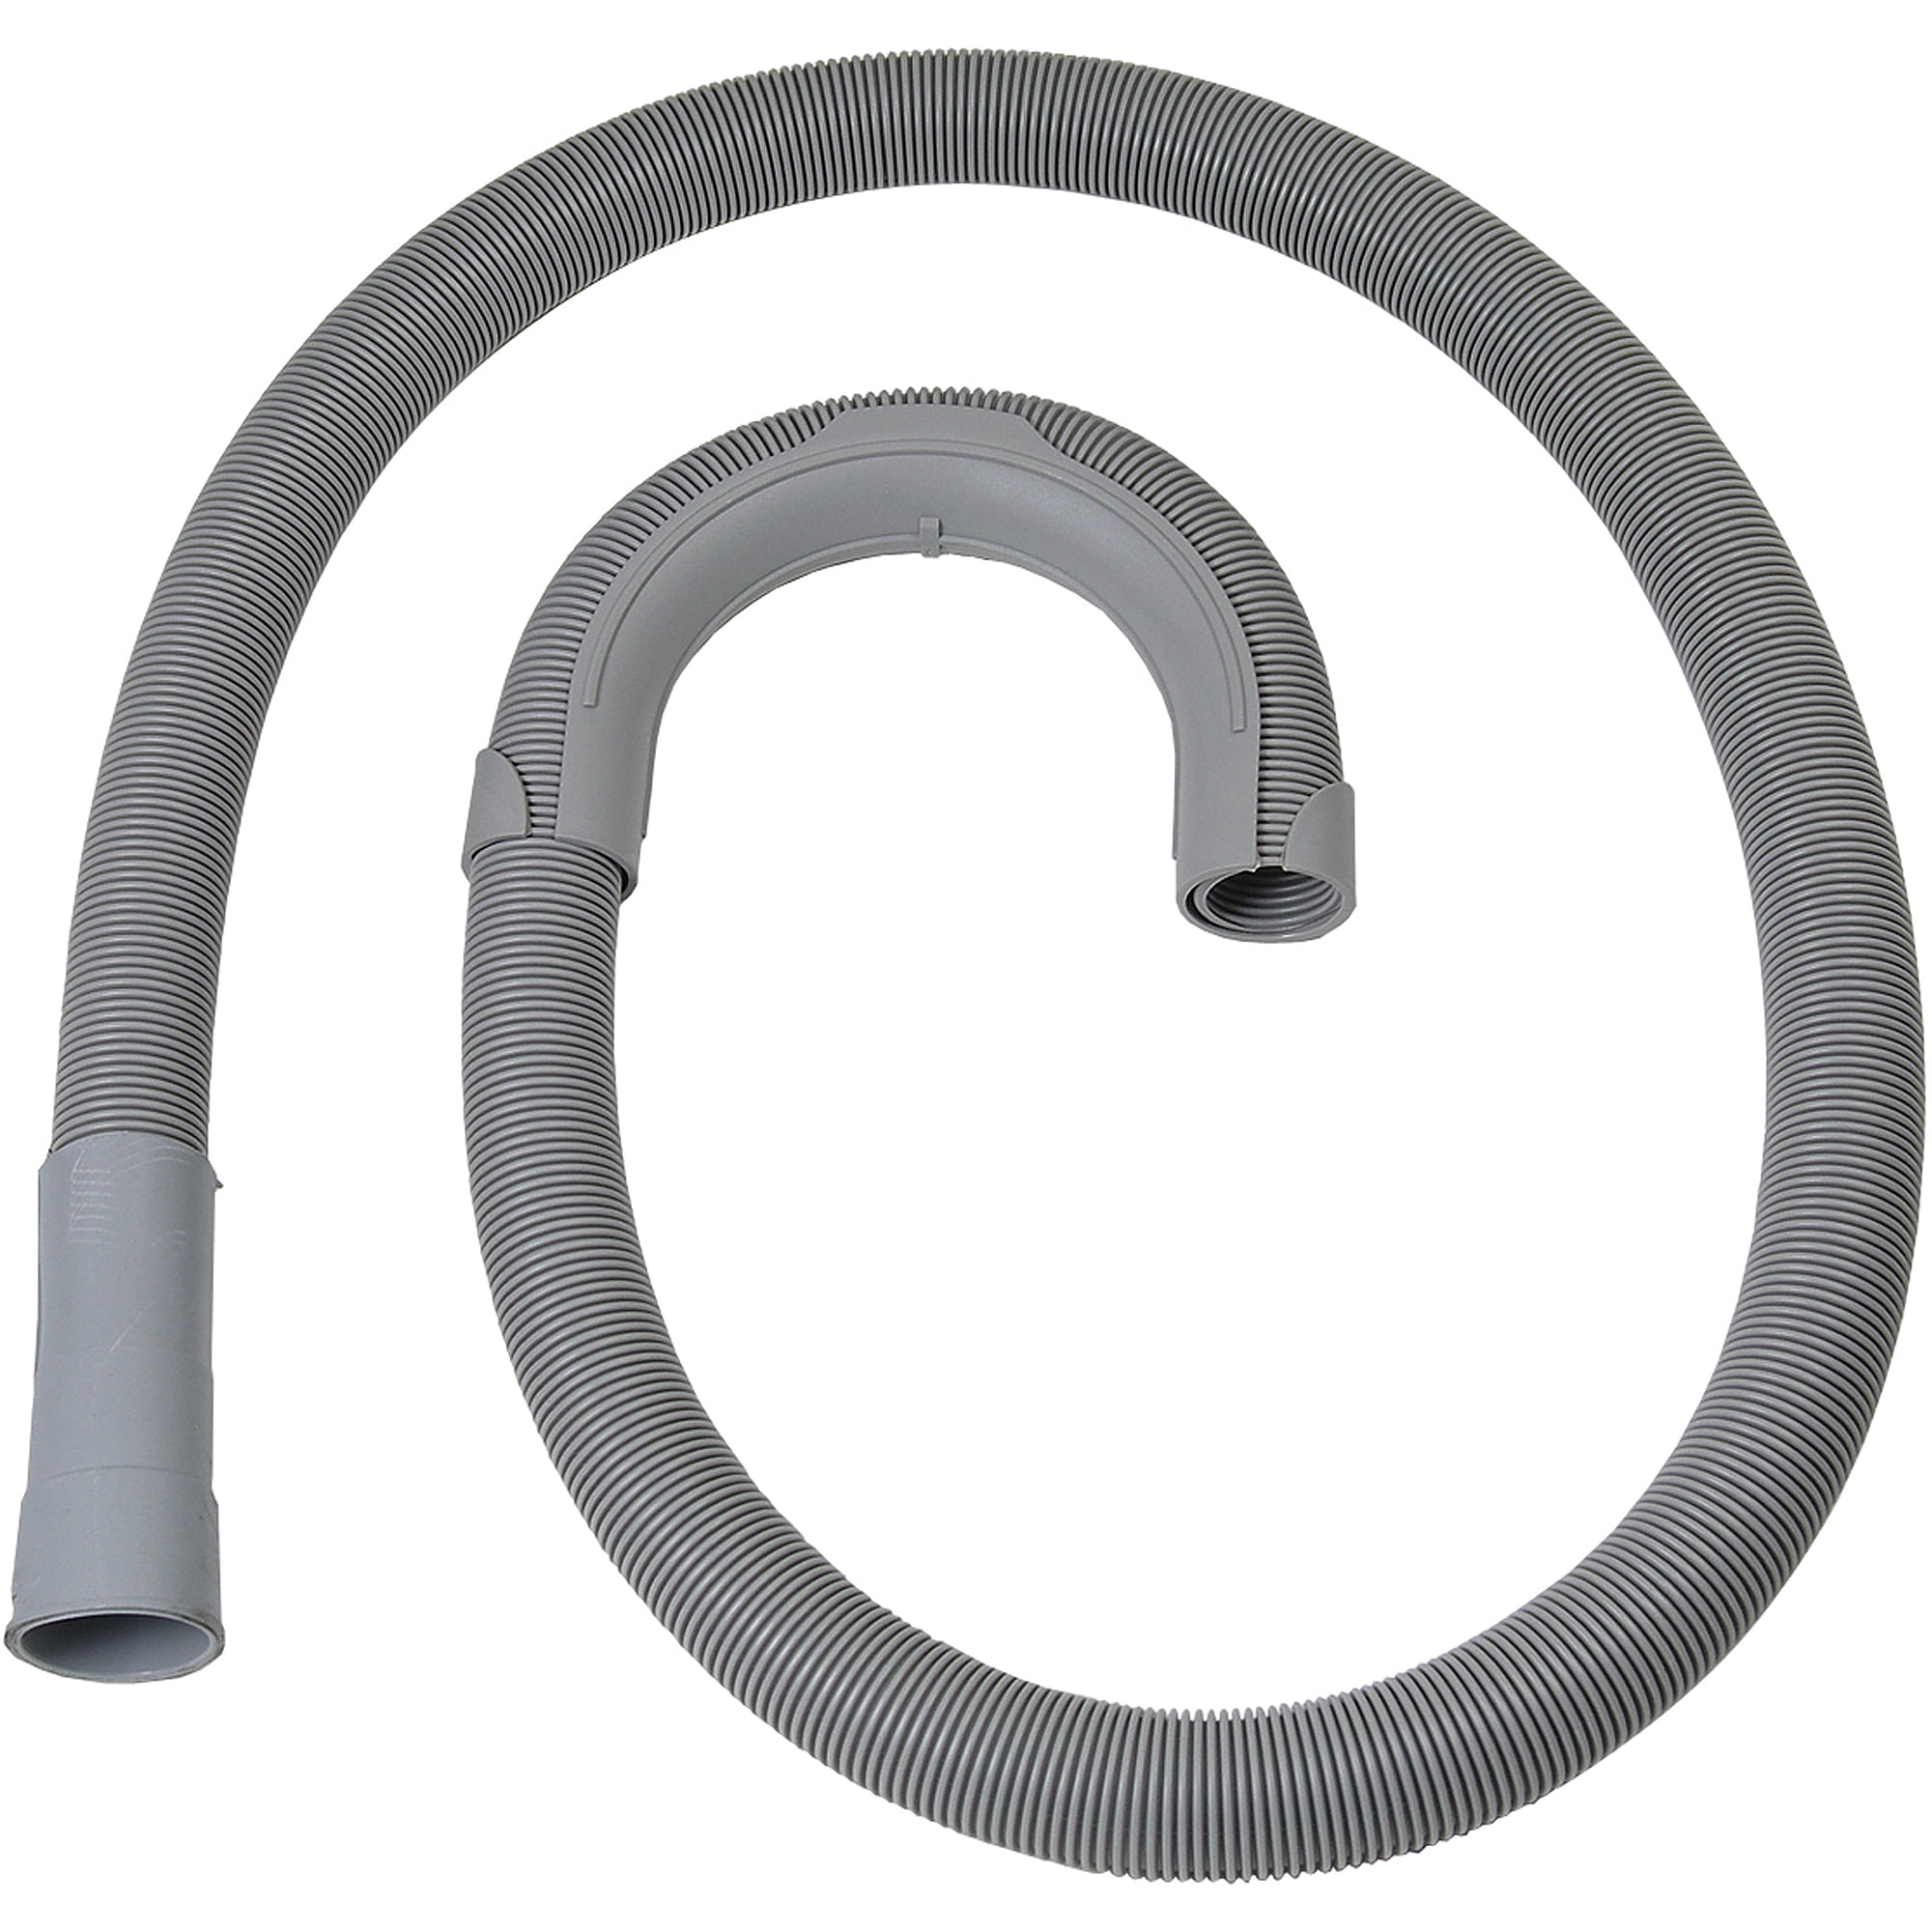 Funmit 8Ft Universal Washing Machine Drain Discharge Hose Flexible Extension Hose High Quality Fit for Most Household Washing Machines 